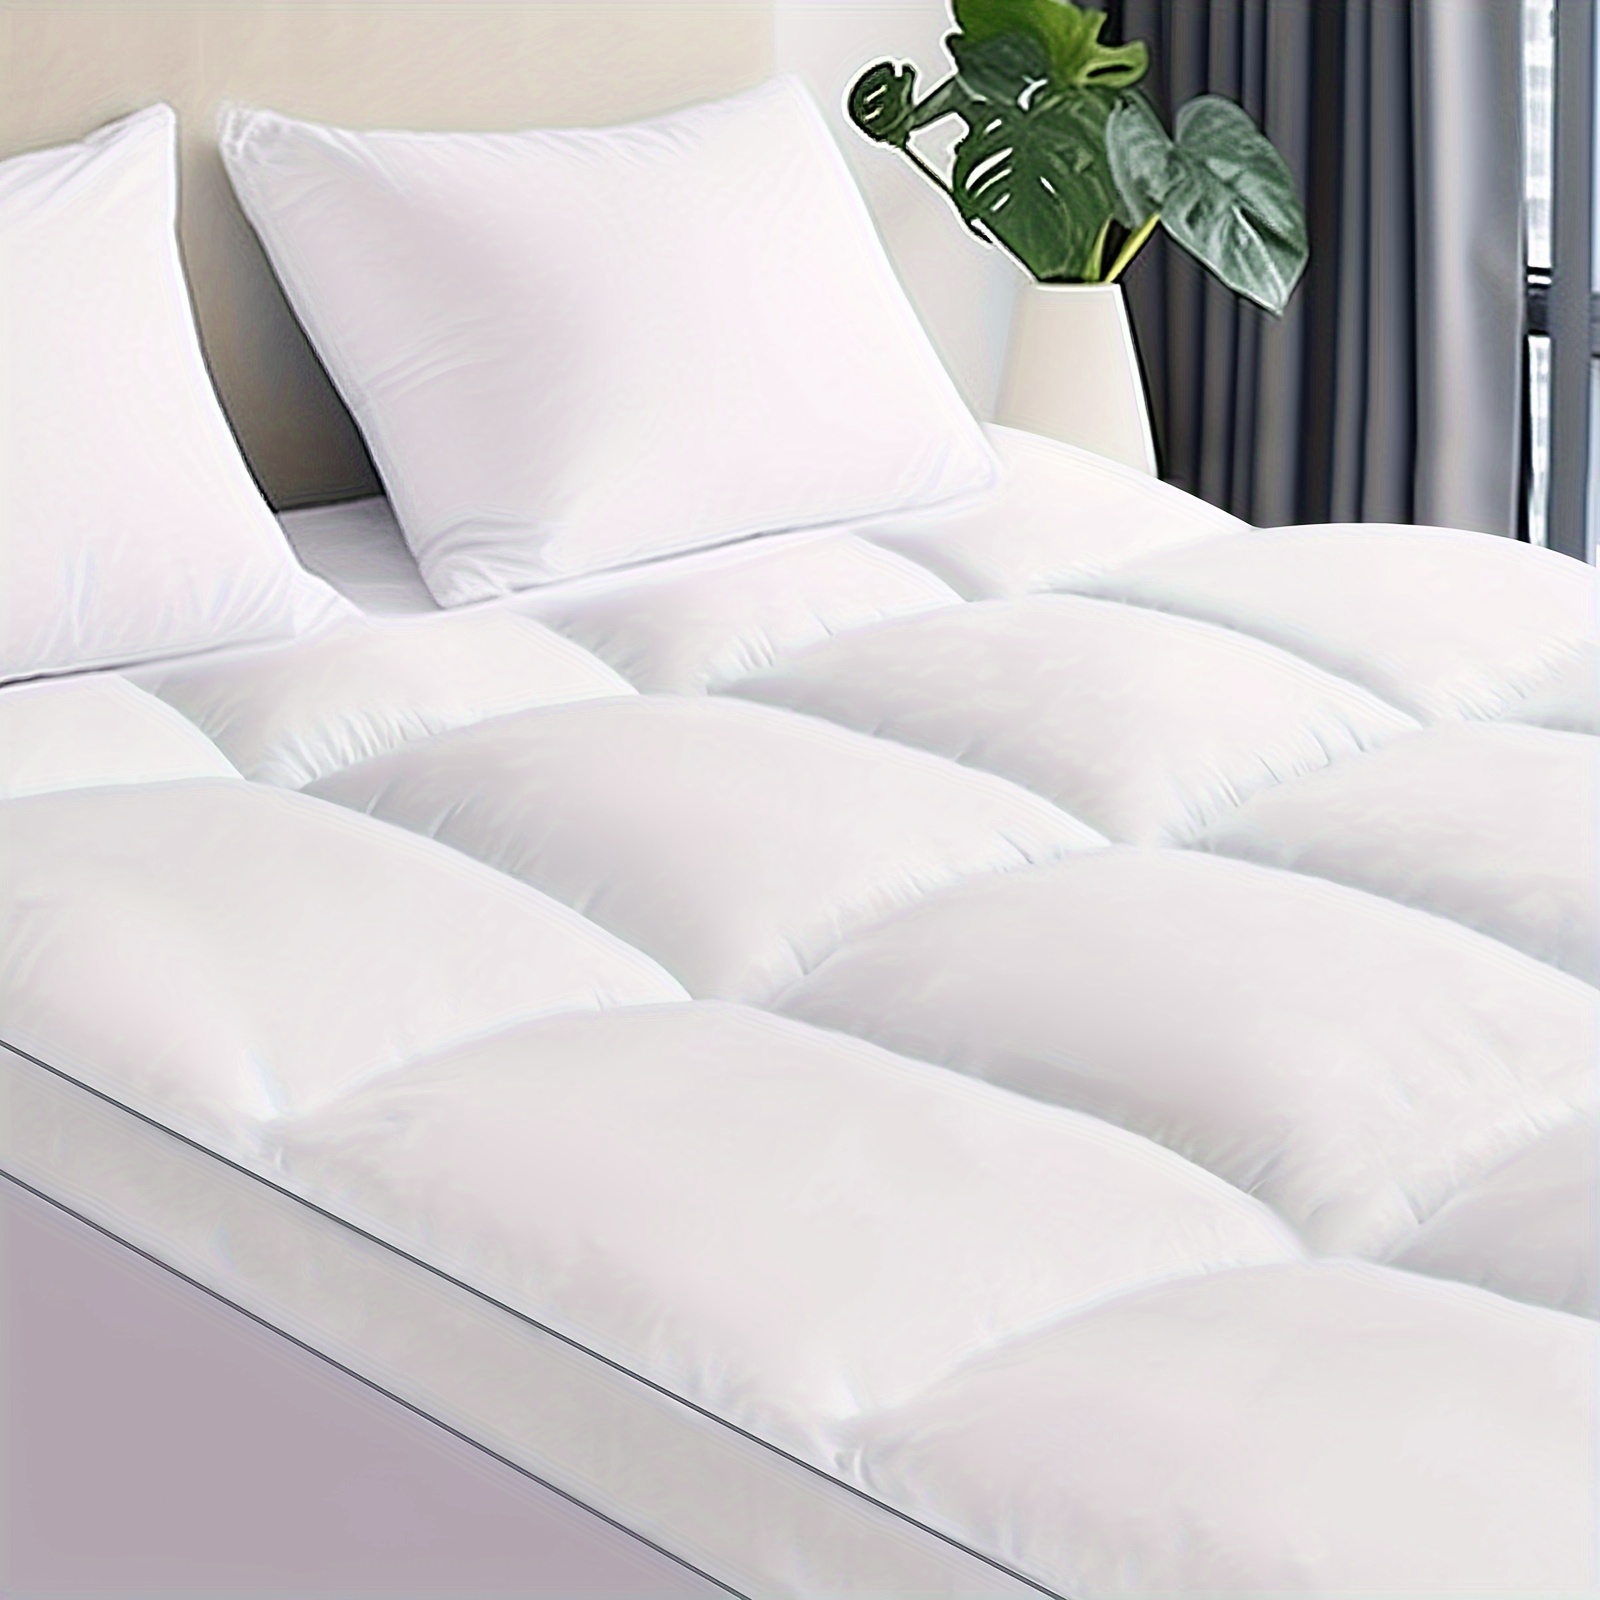 

850gsm Extra Thick Mattress Topper With Flat Sheet And Pillowcases - Extra Thick Mattress Pad Cover For Back Pain - Soft Bedding Sheet - Overfilled Plush Pillow Top With 8-21 Inch Deep Pocket